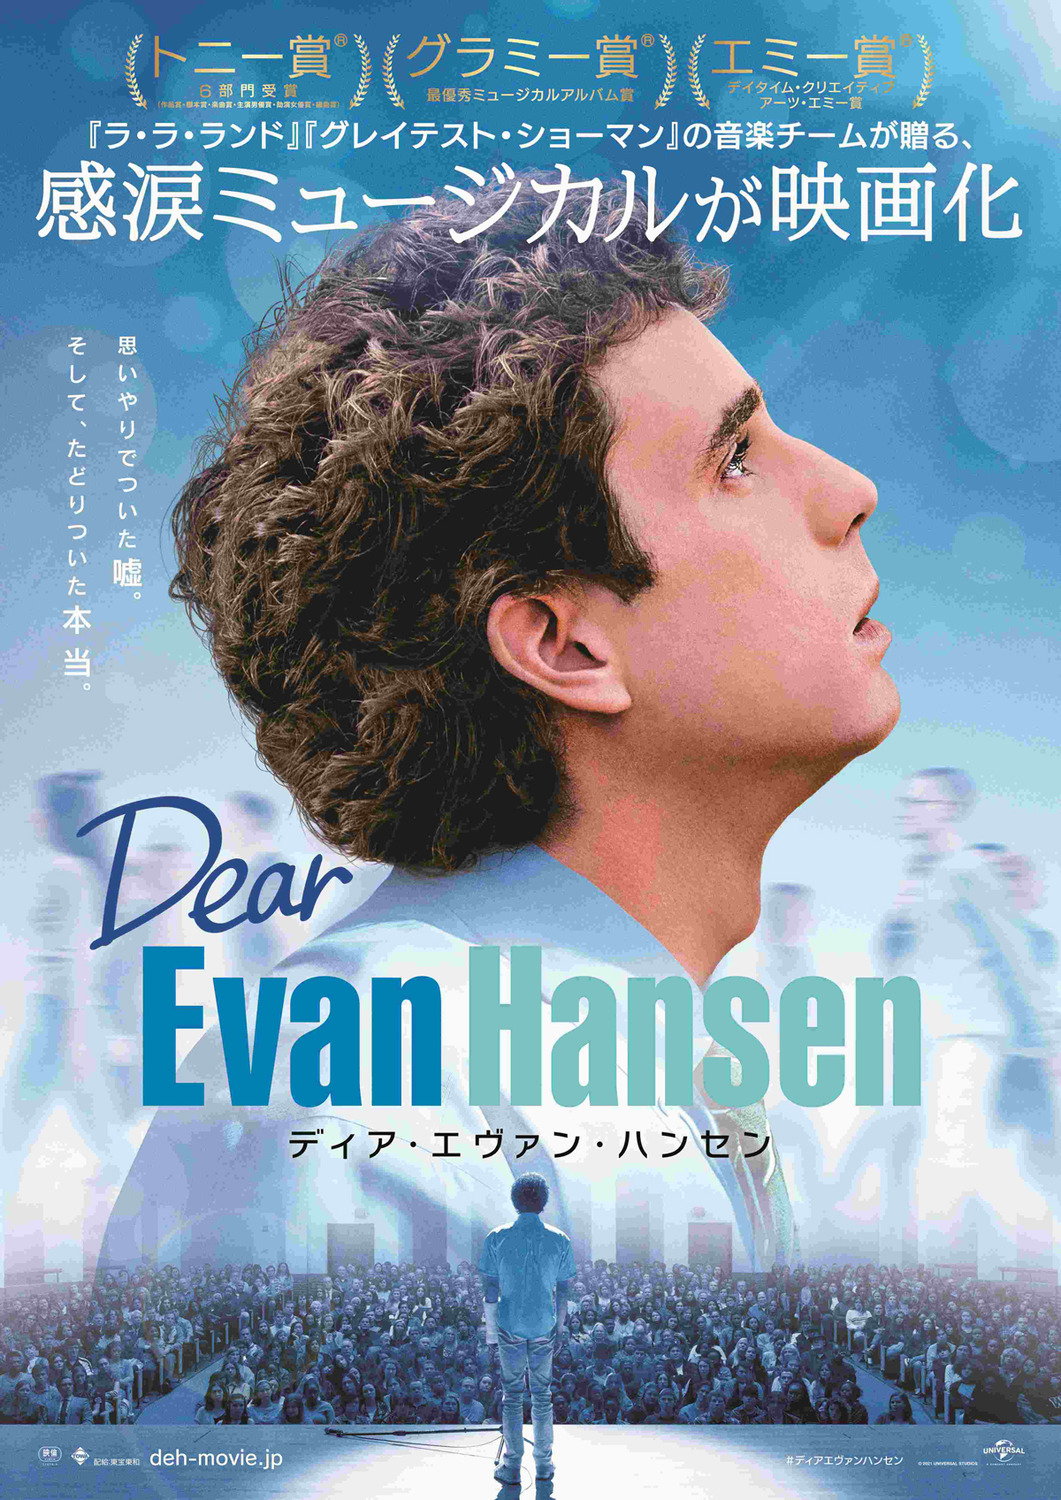 Extra Large Movie Poster Image for Dear Evan Hansen (#6 of 6)